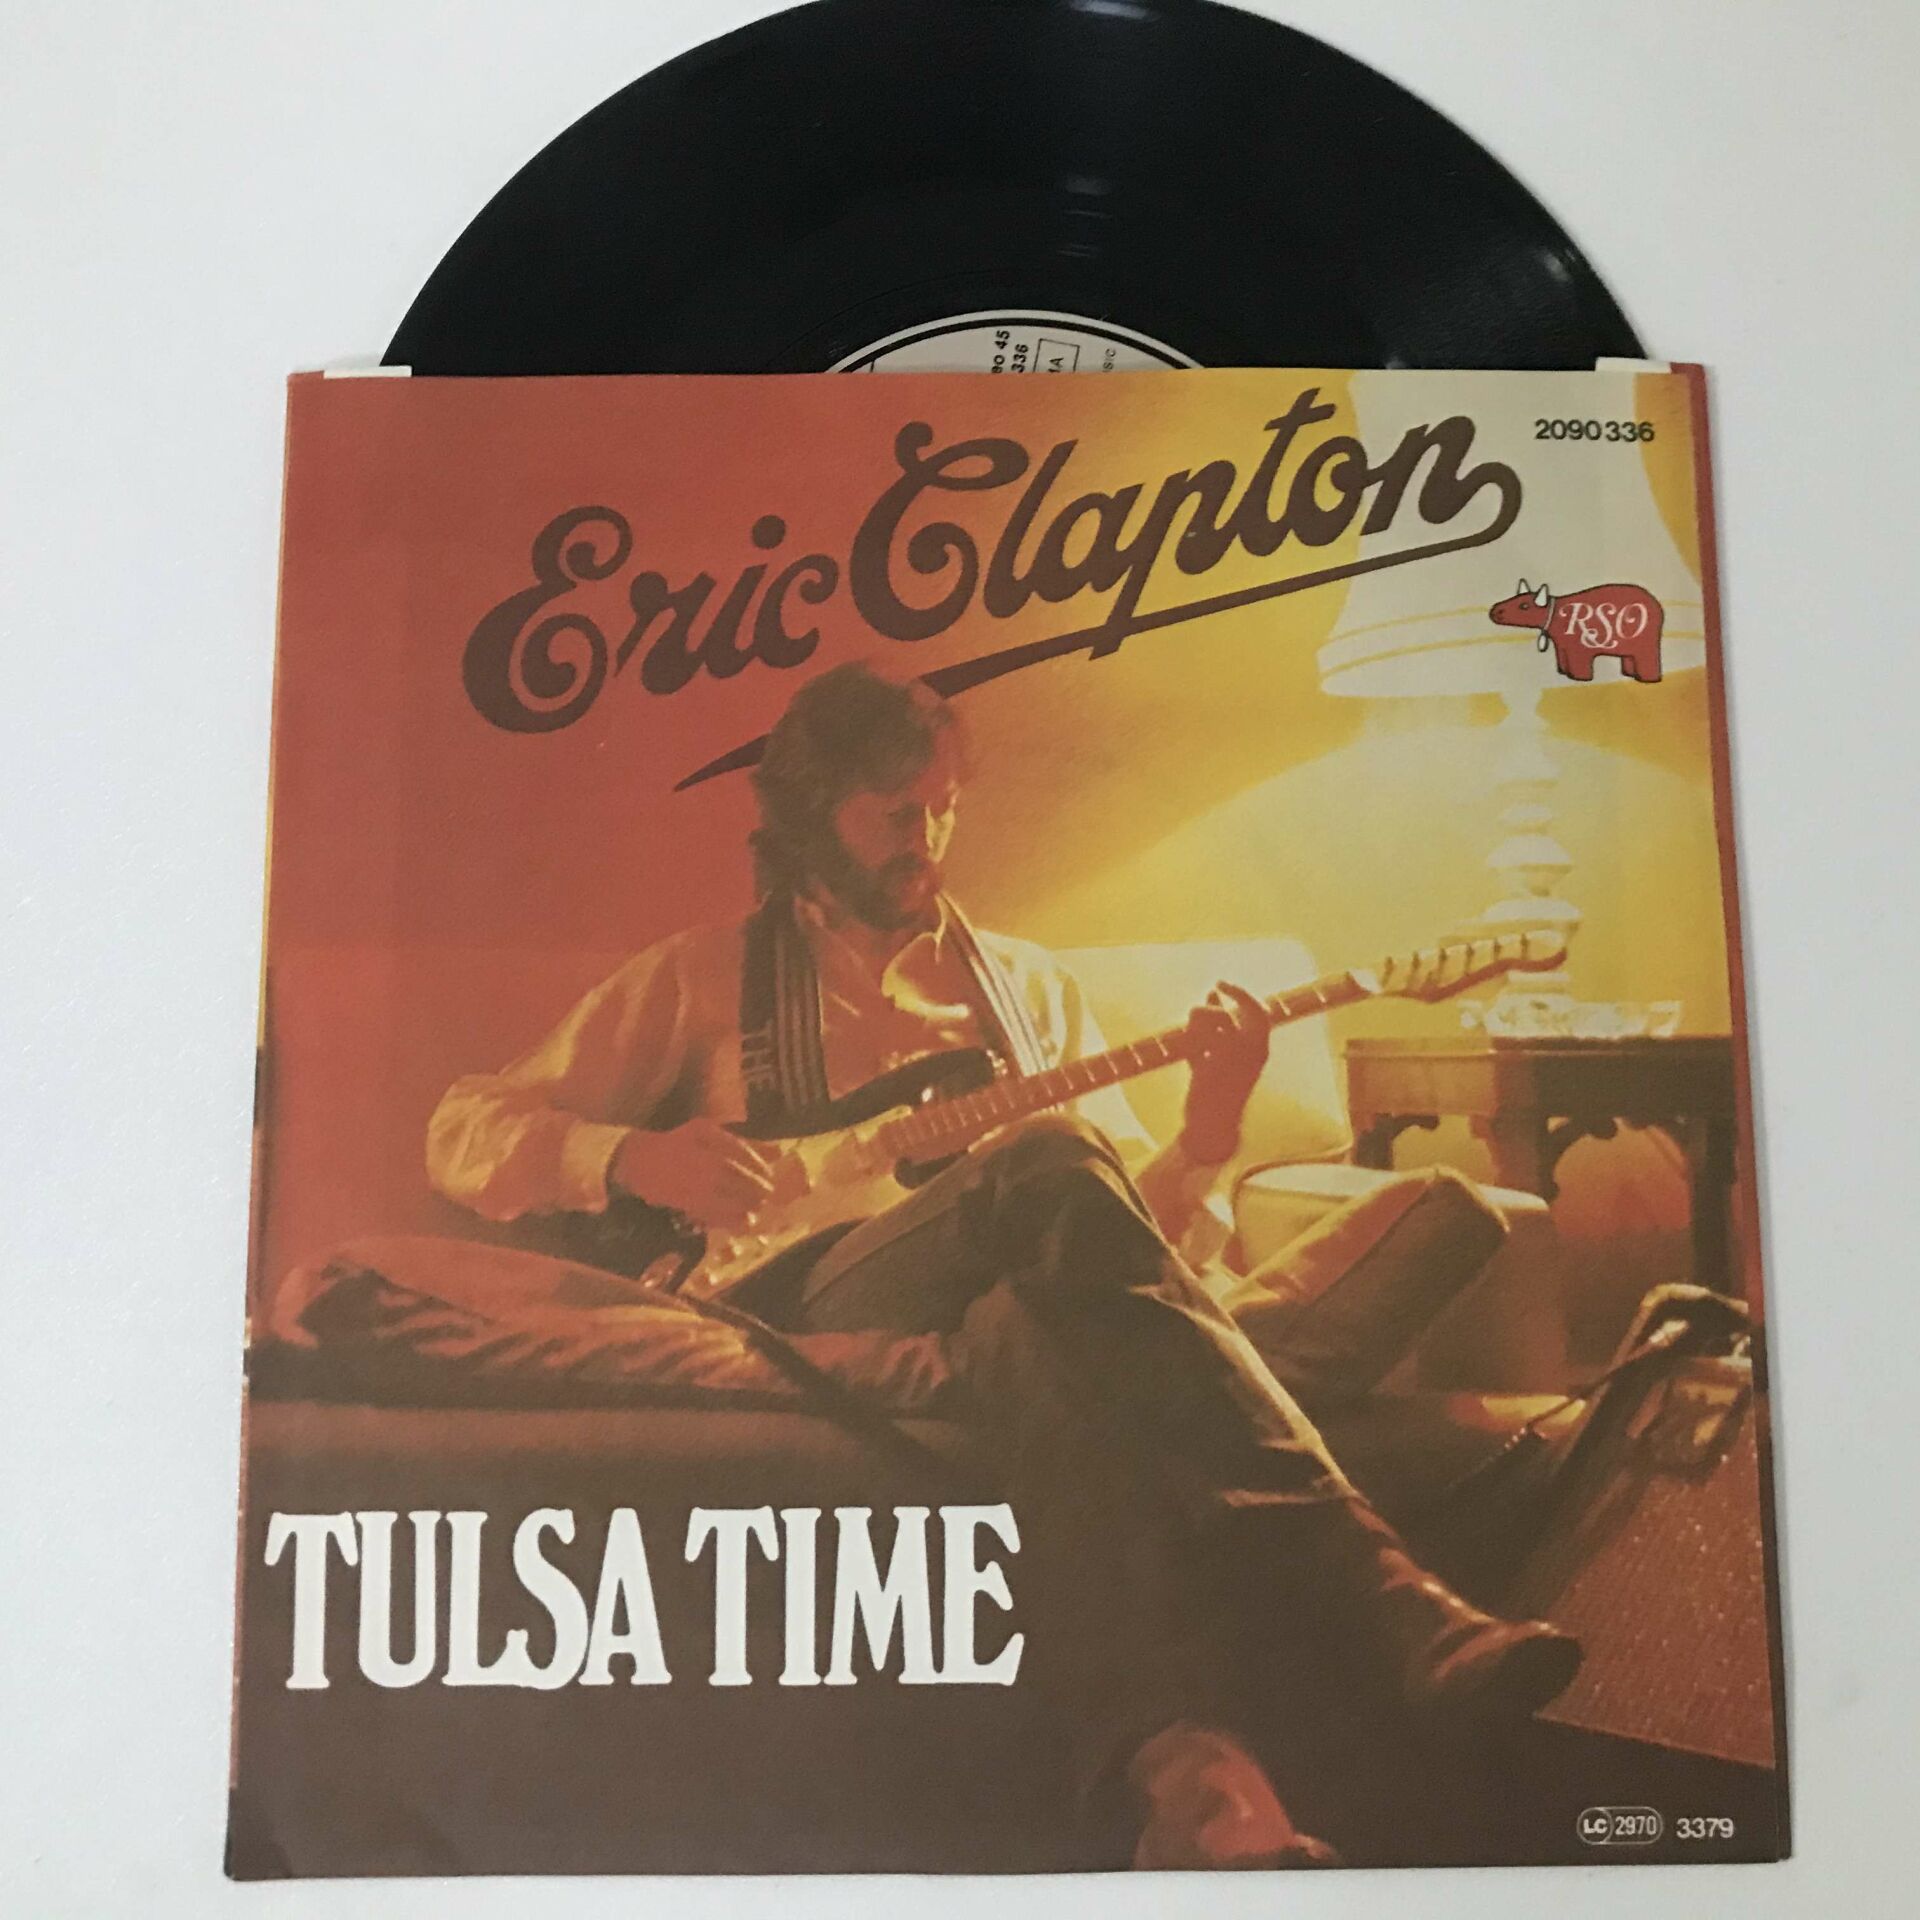 Eric Clapton – Tulsa Time / If I Don't Be There By The Morning